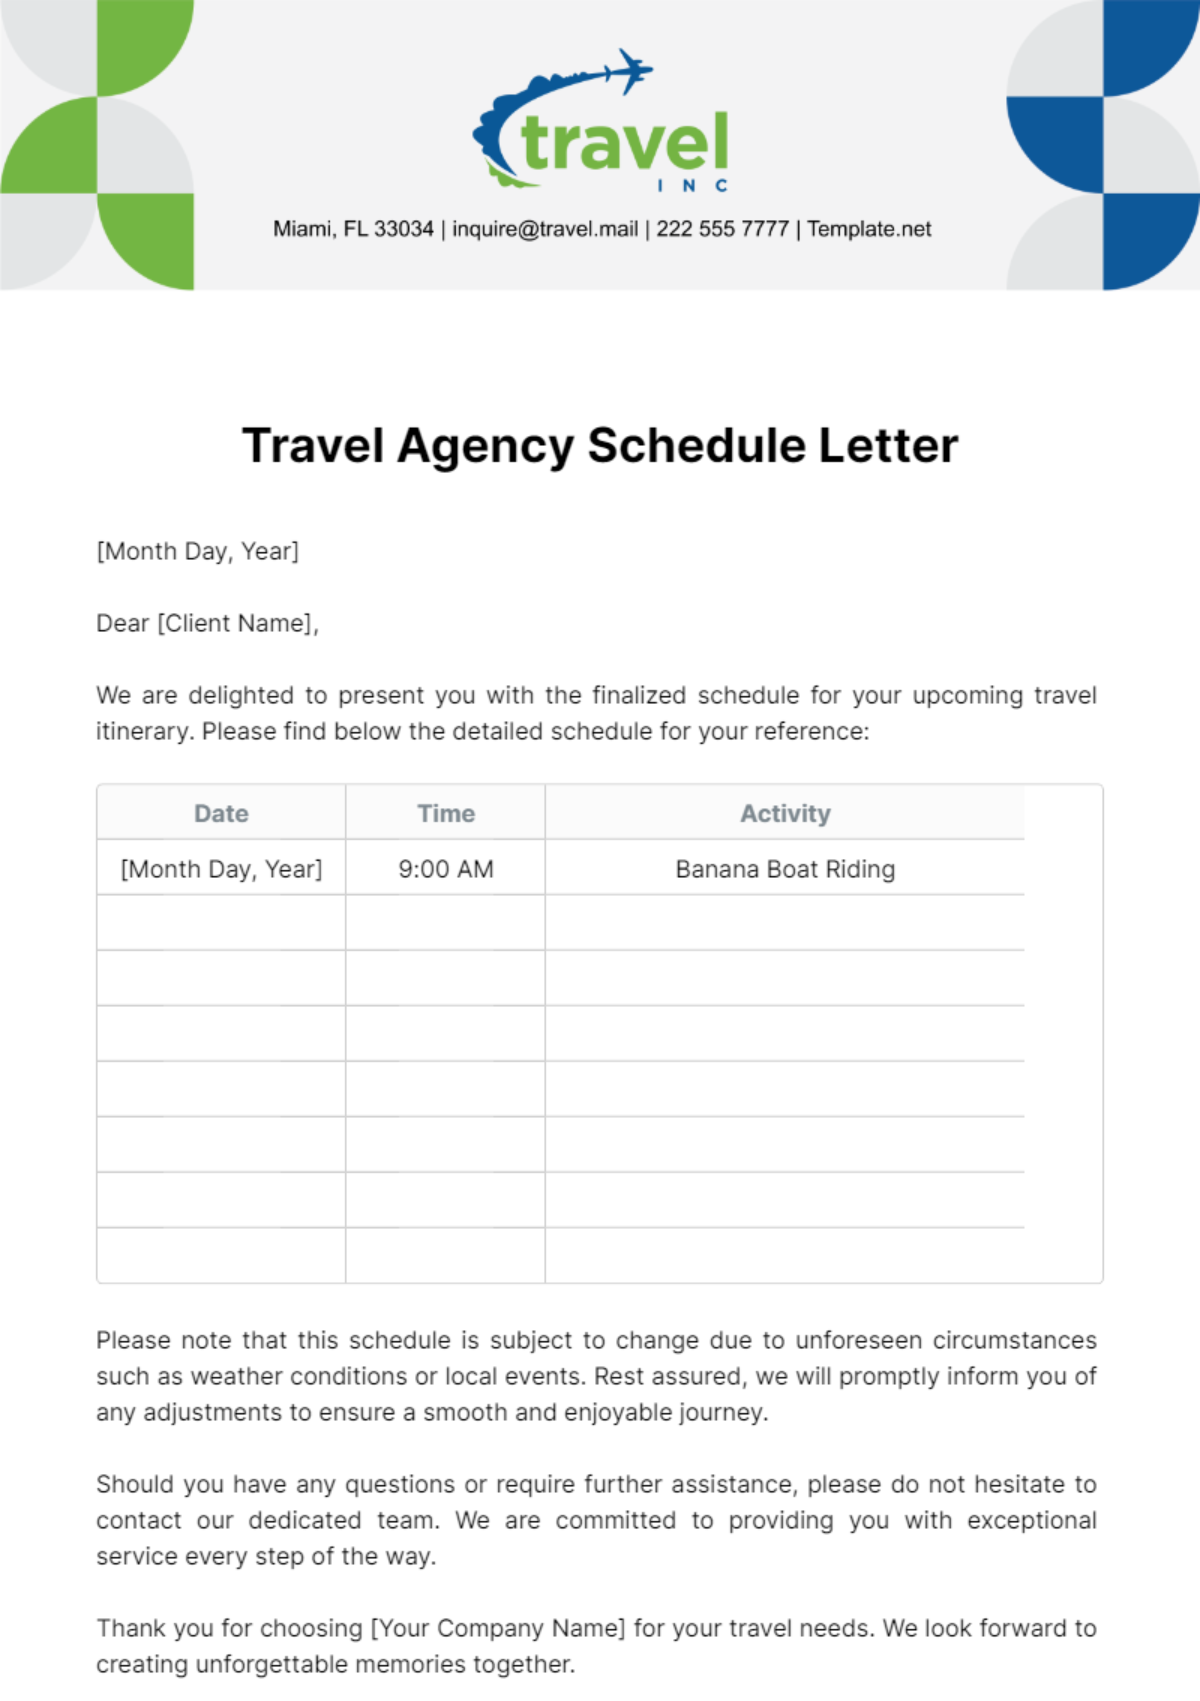 Free Travel Agency Schedule Letter Template